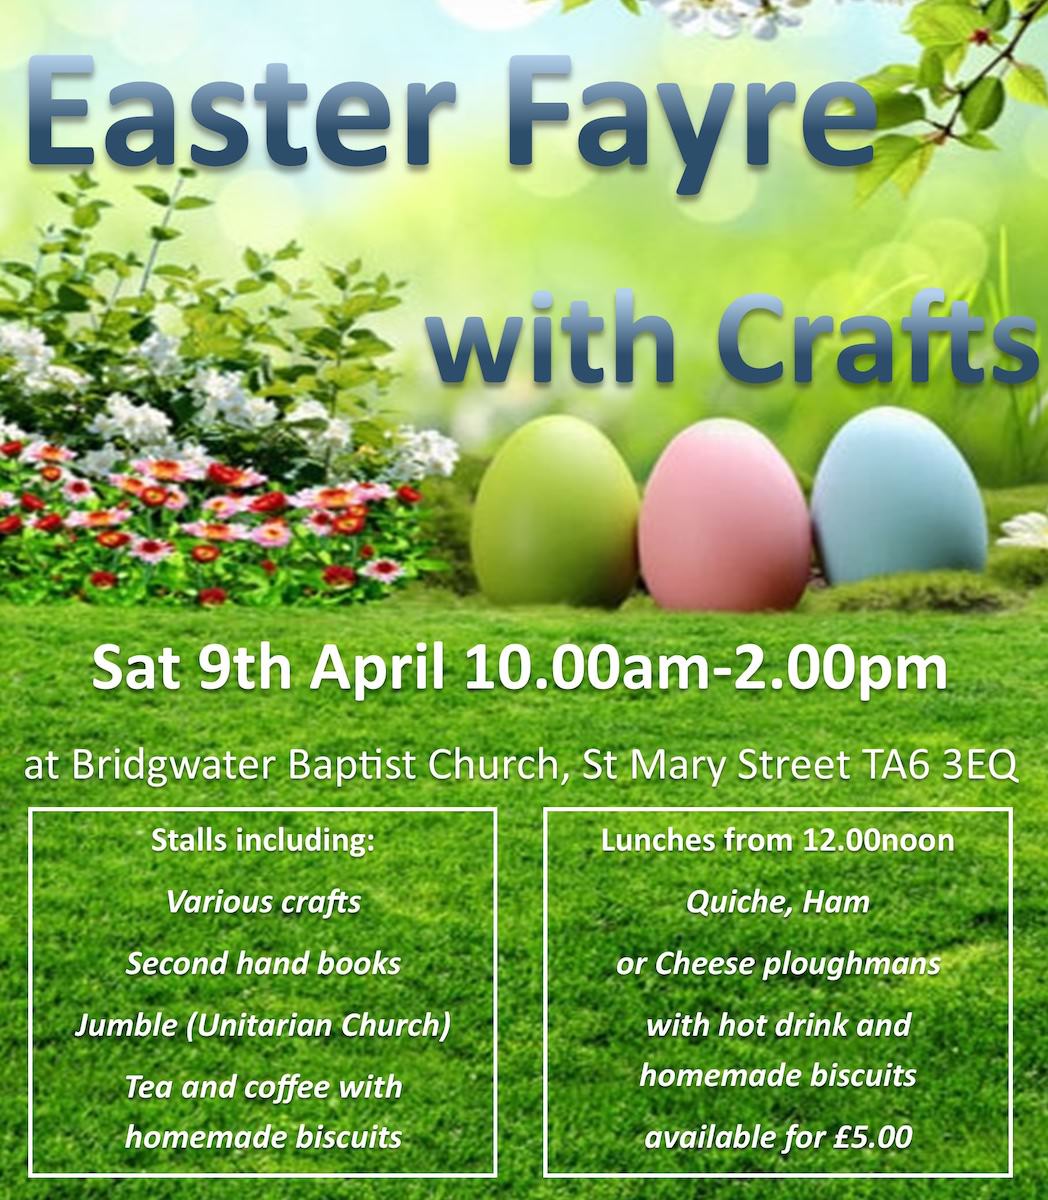 Easter Fayre with Crafts - Saturday, 9th April 10am to 2pm. Stalls. Lunch from 12 noon, £5.